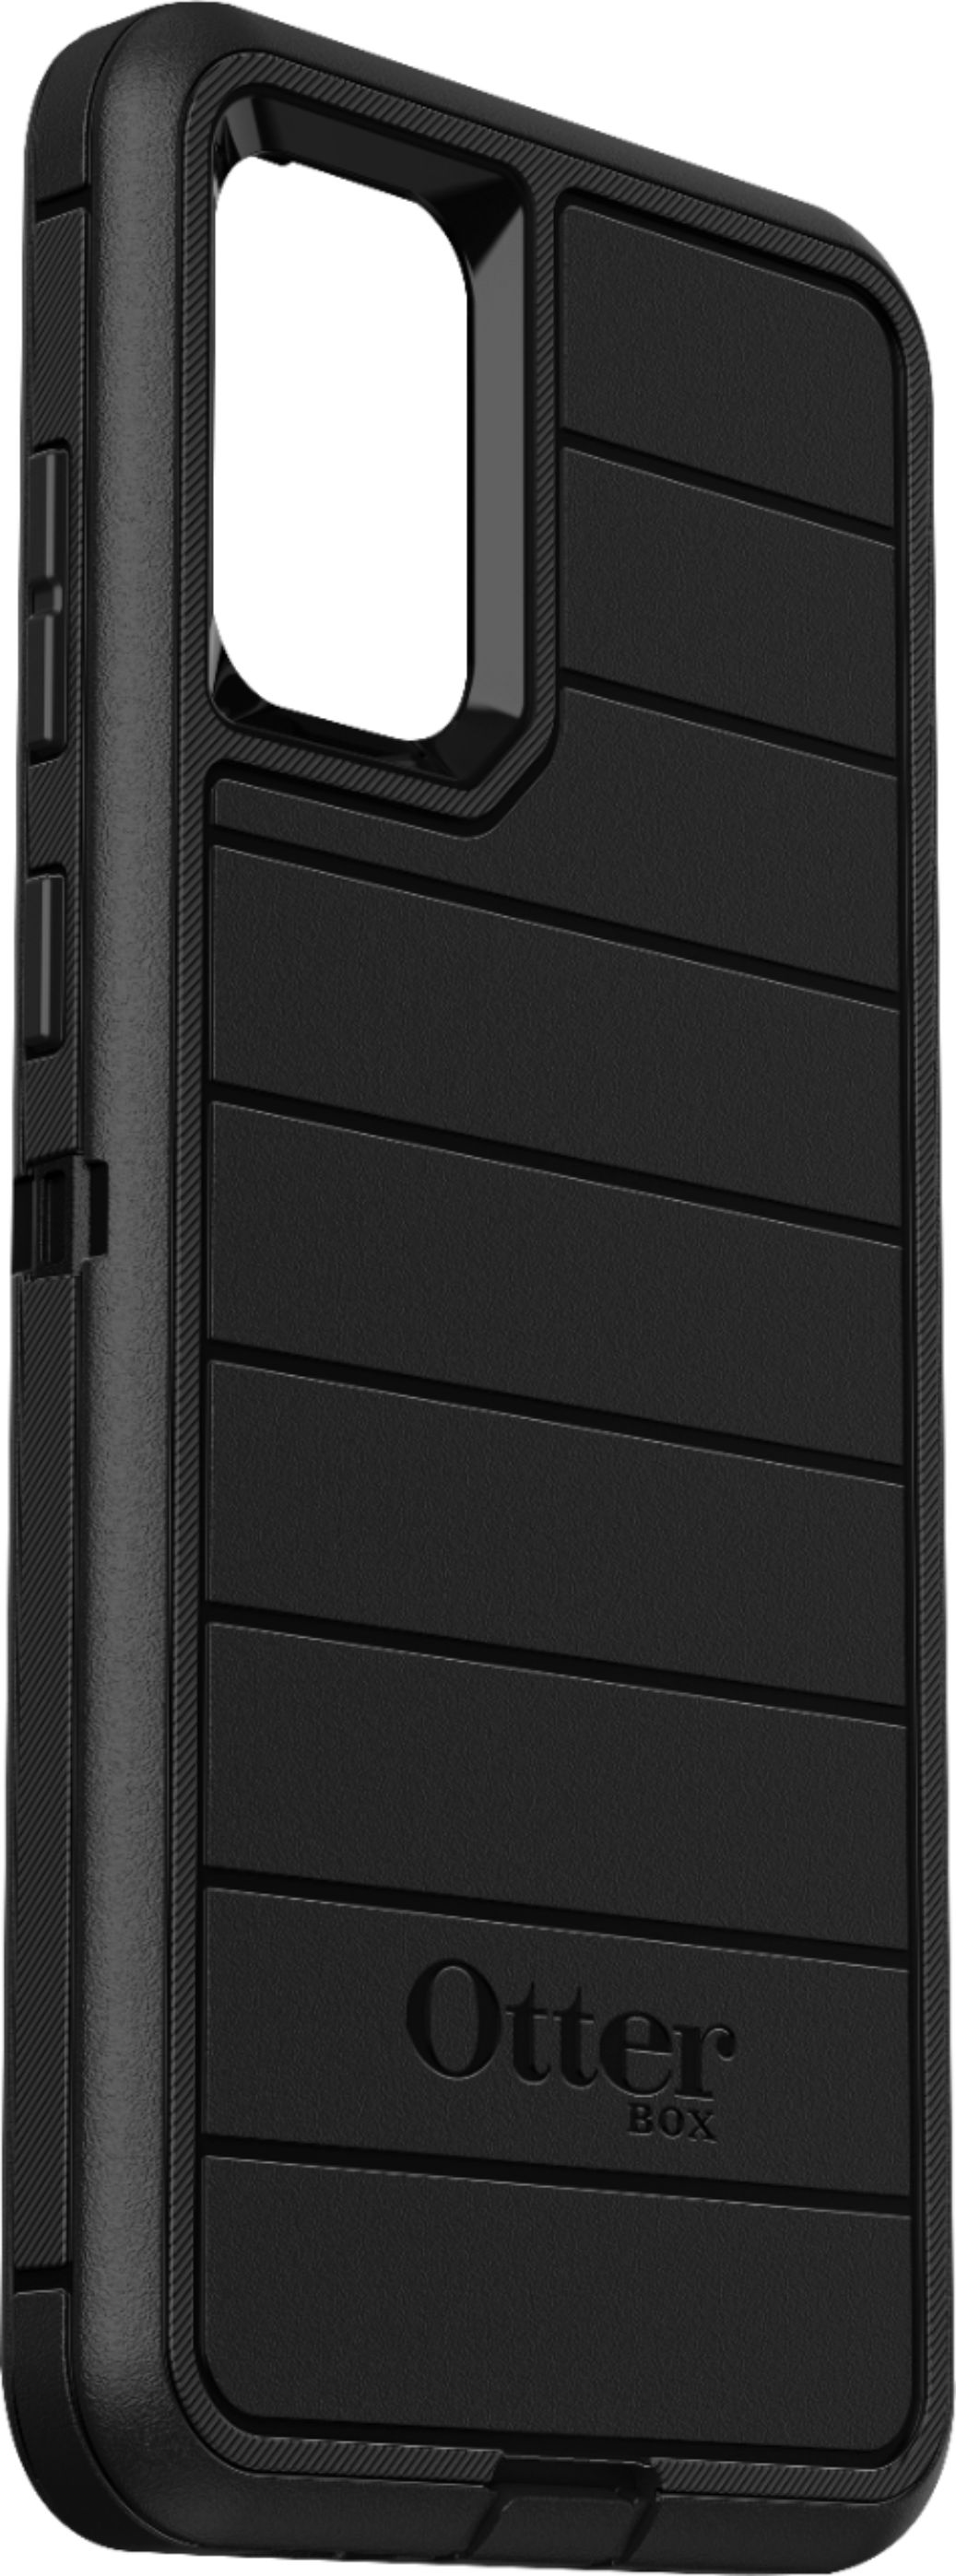 Angle View: OtterBox - Defender Series Pro Case for Samsung Galaxy S20+ 5G - Black